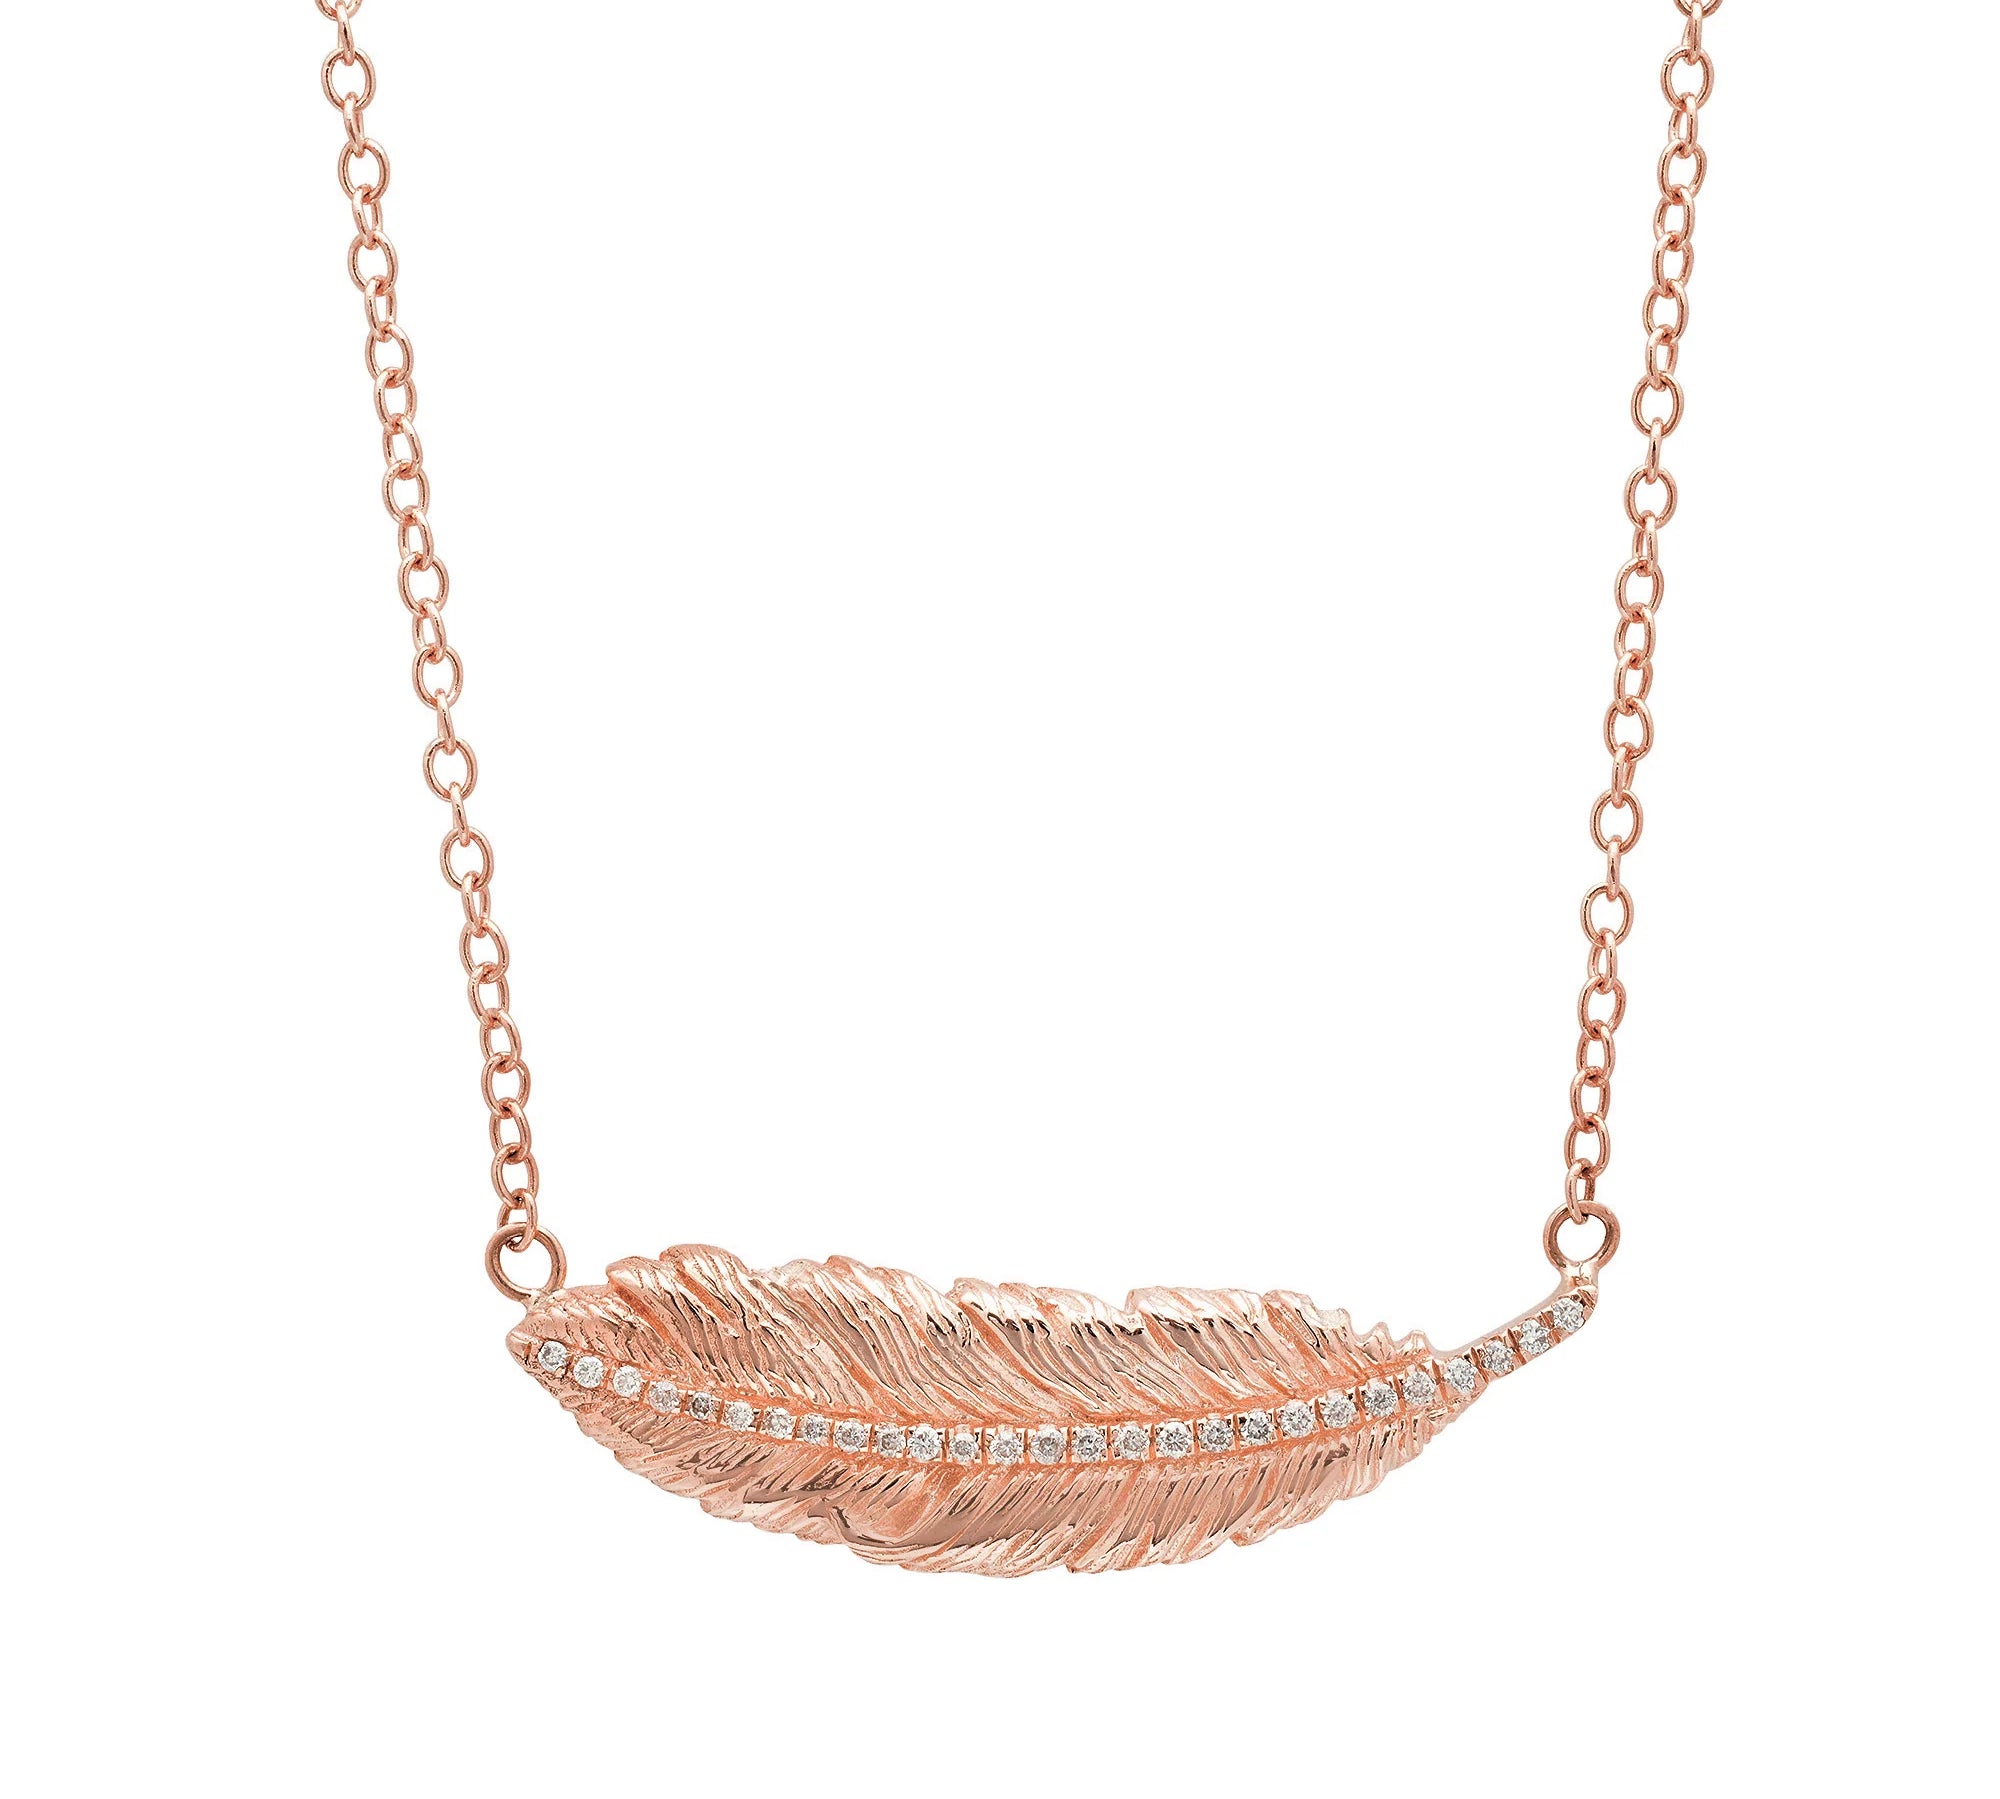 Small Feather Necklace Pendant Elisabeth Bell Jewelry Rose Gold  